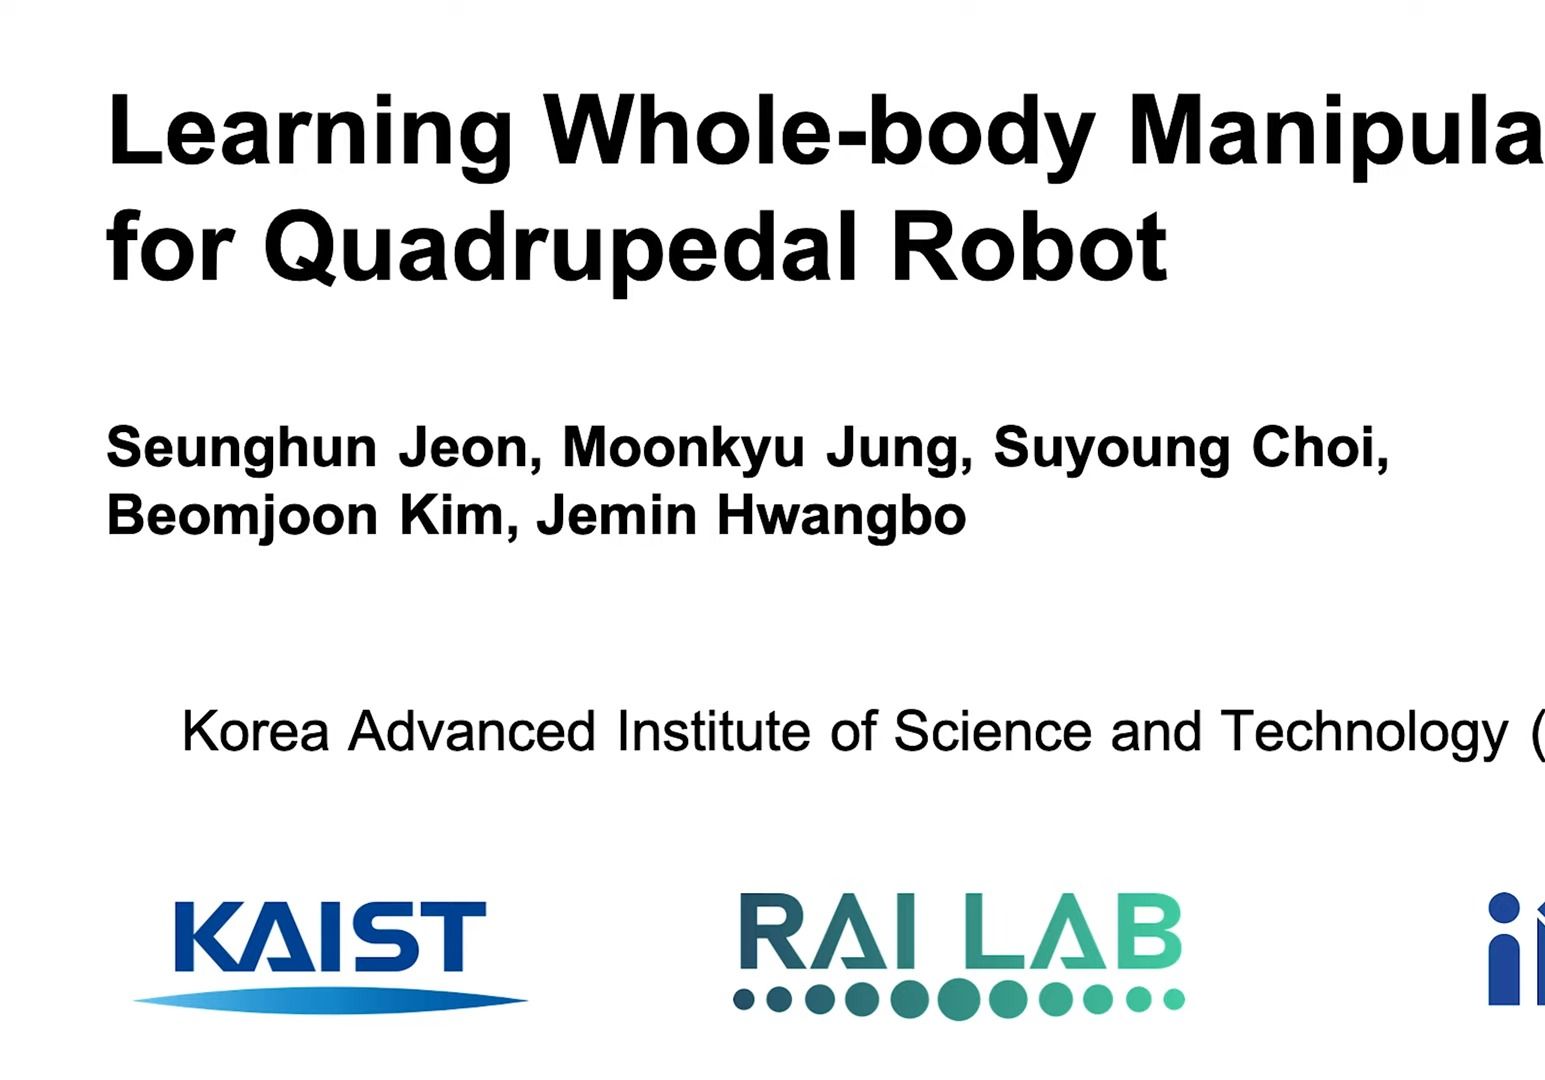 Learning whole-body manipulation for quadrupedal robot